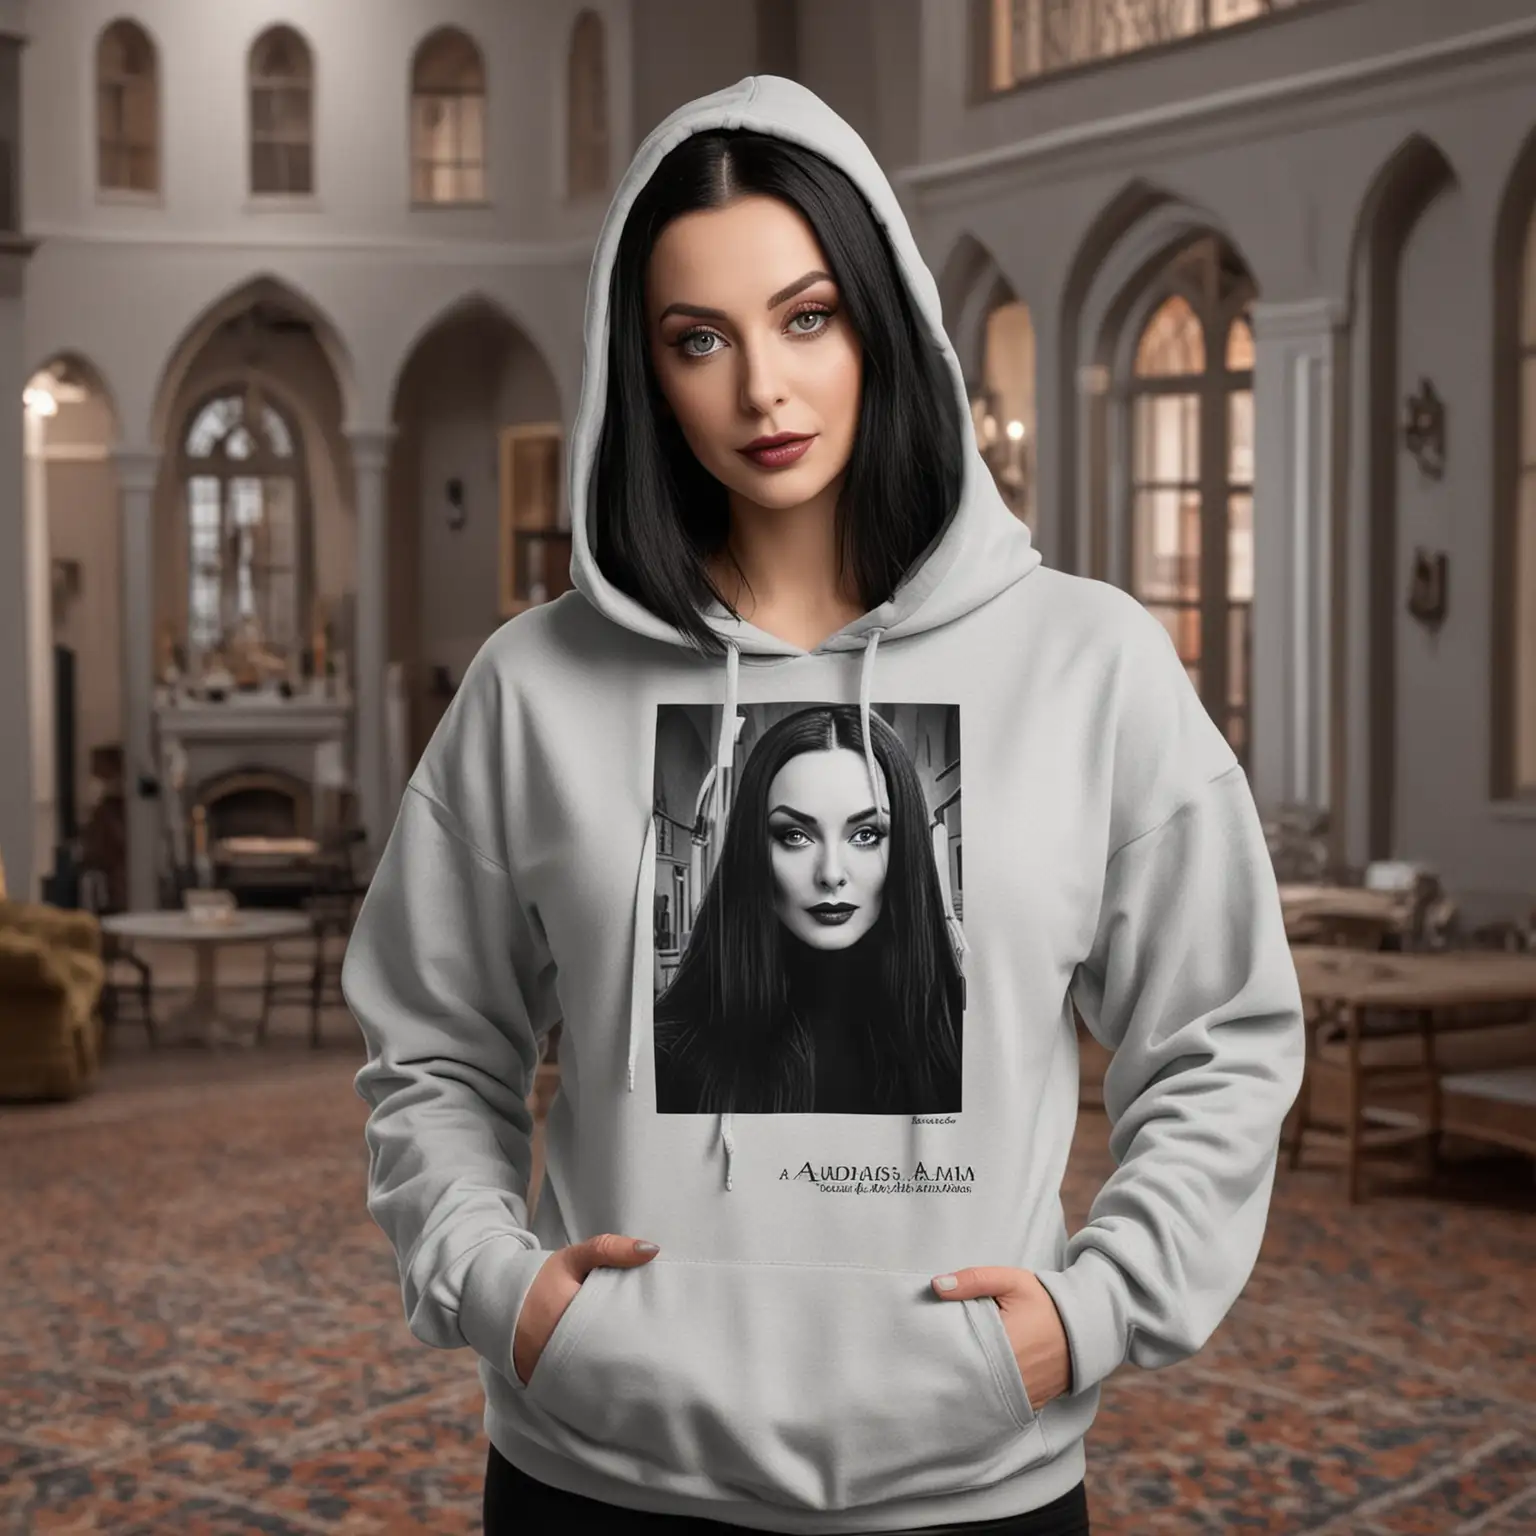 mockup for a grey hoodie.  The model should be female and resemble morticia addams.  the background of the photo should resemble the inside of the addams family house